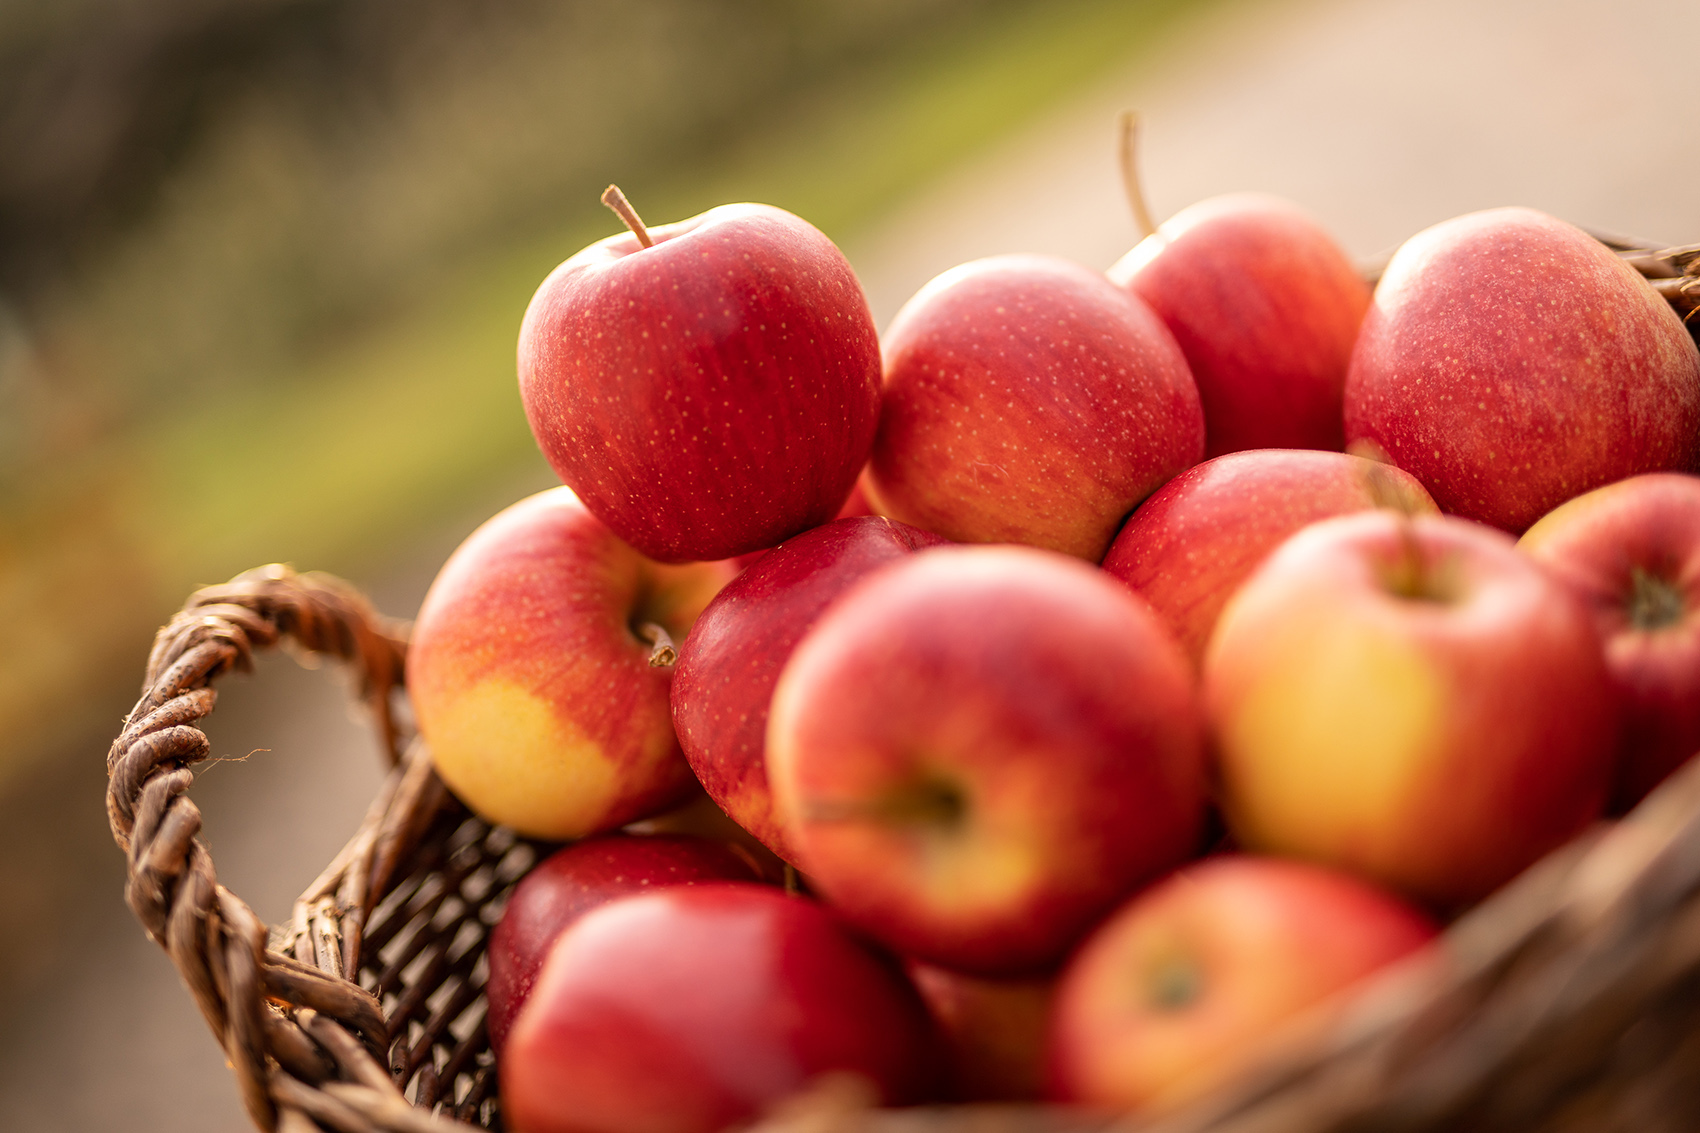 Red apples: why they are good and how to consume them